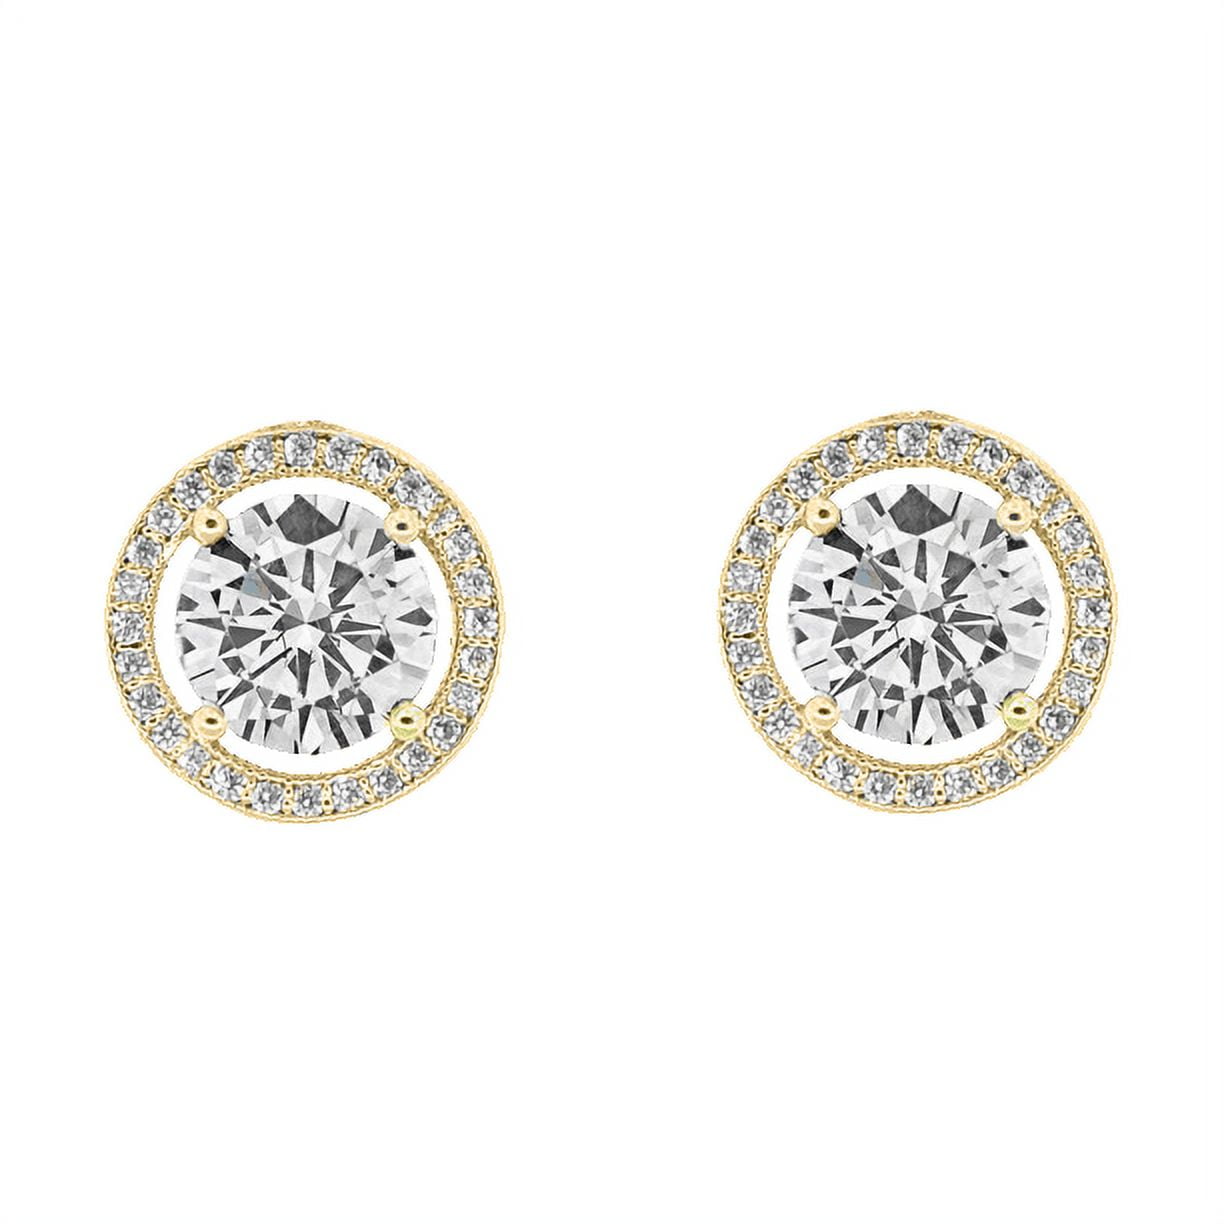 Cate & Chloe Ariel 18k Yellow Gold Plated Halo Stud Earrings | CZ Crystal Earrings for Women, Gift for Her - image 1 of 9